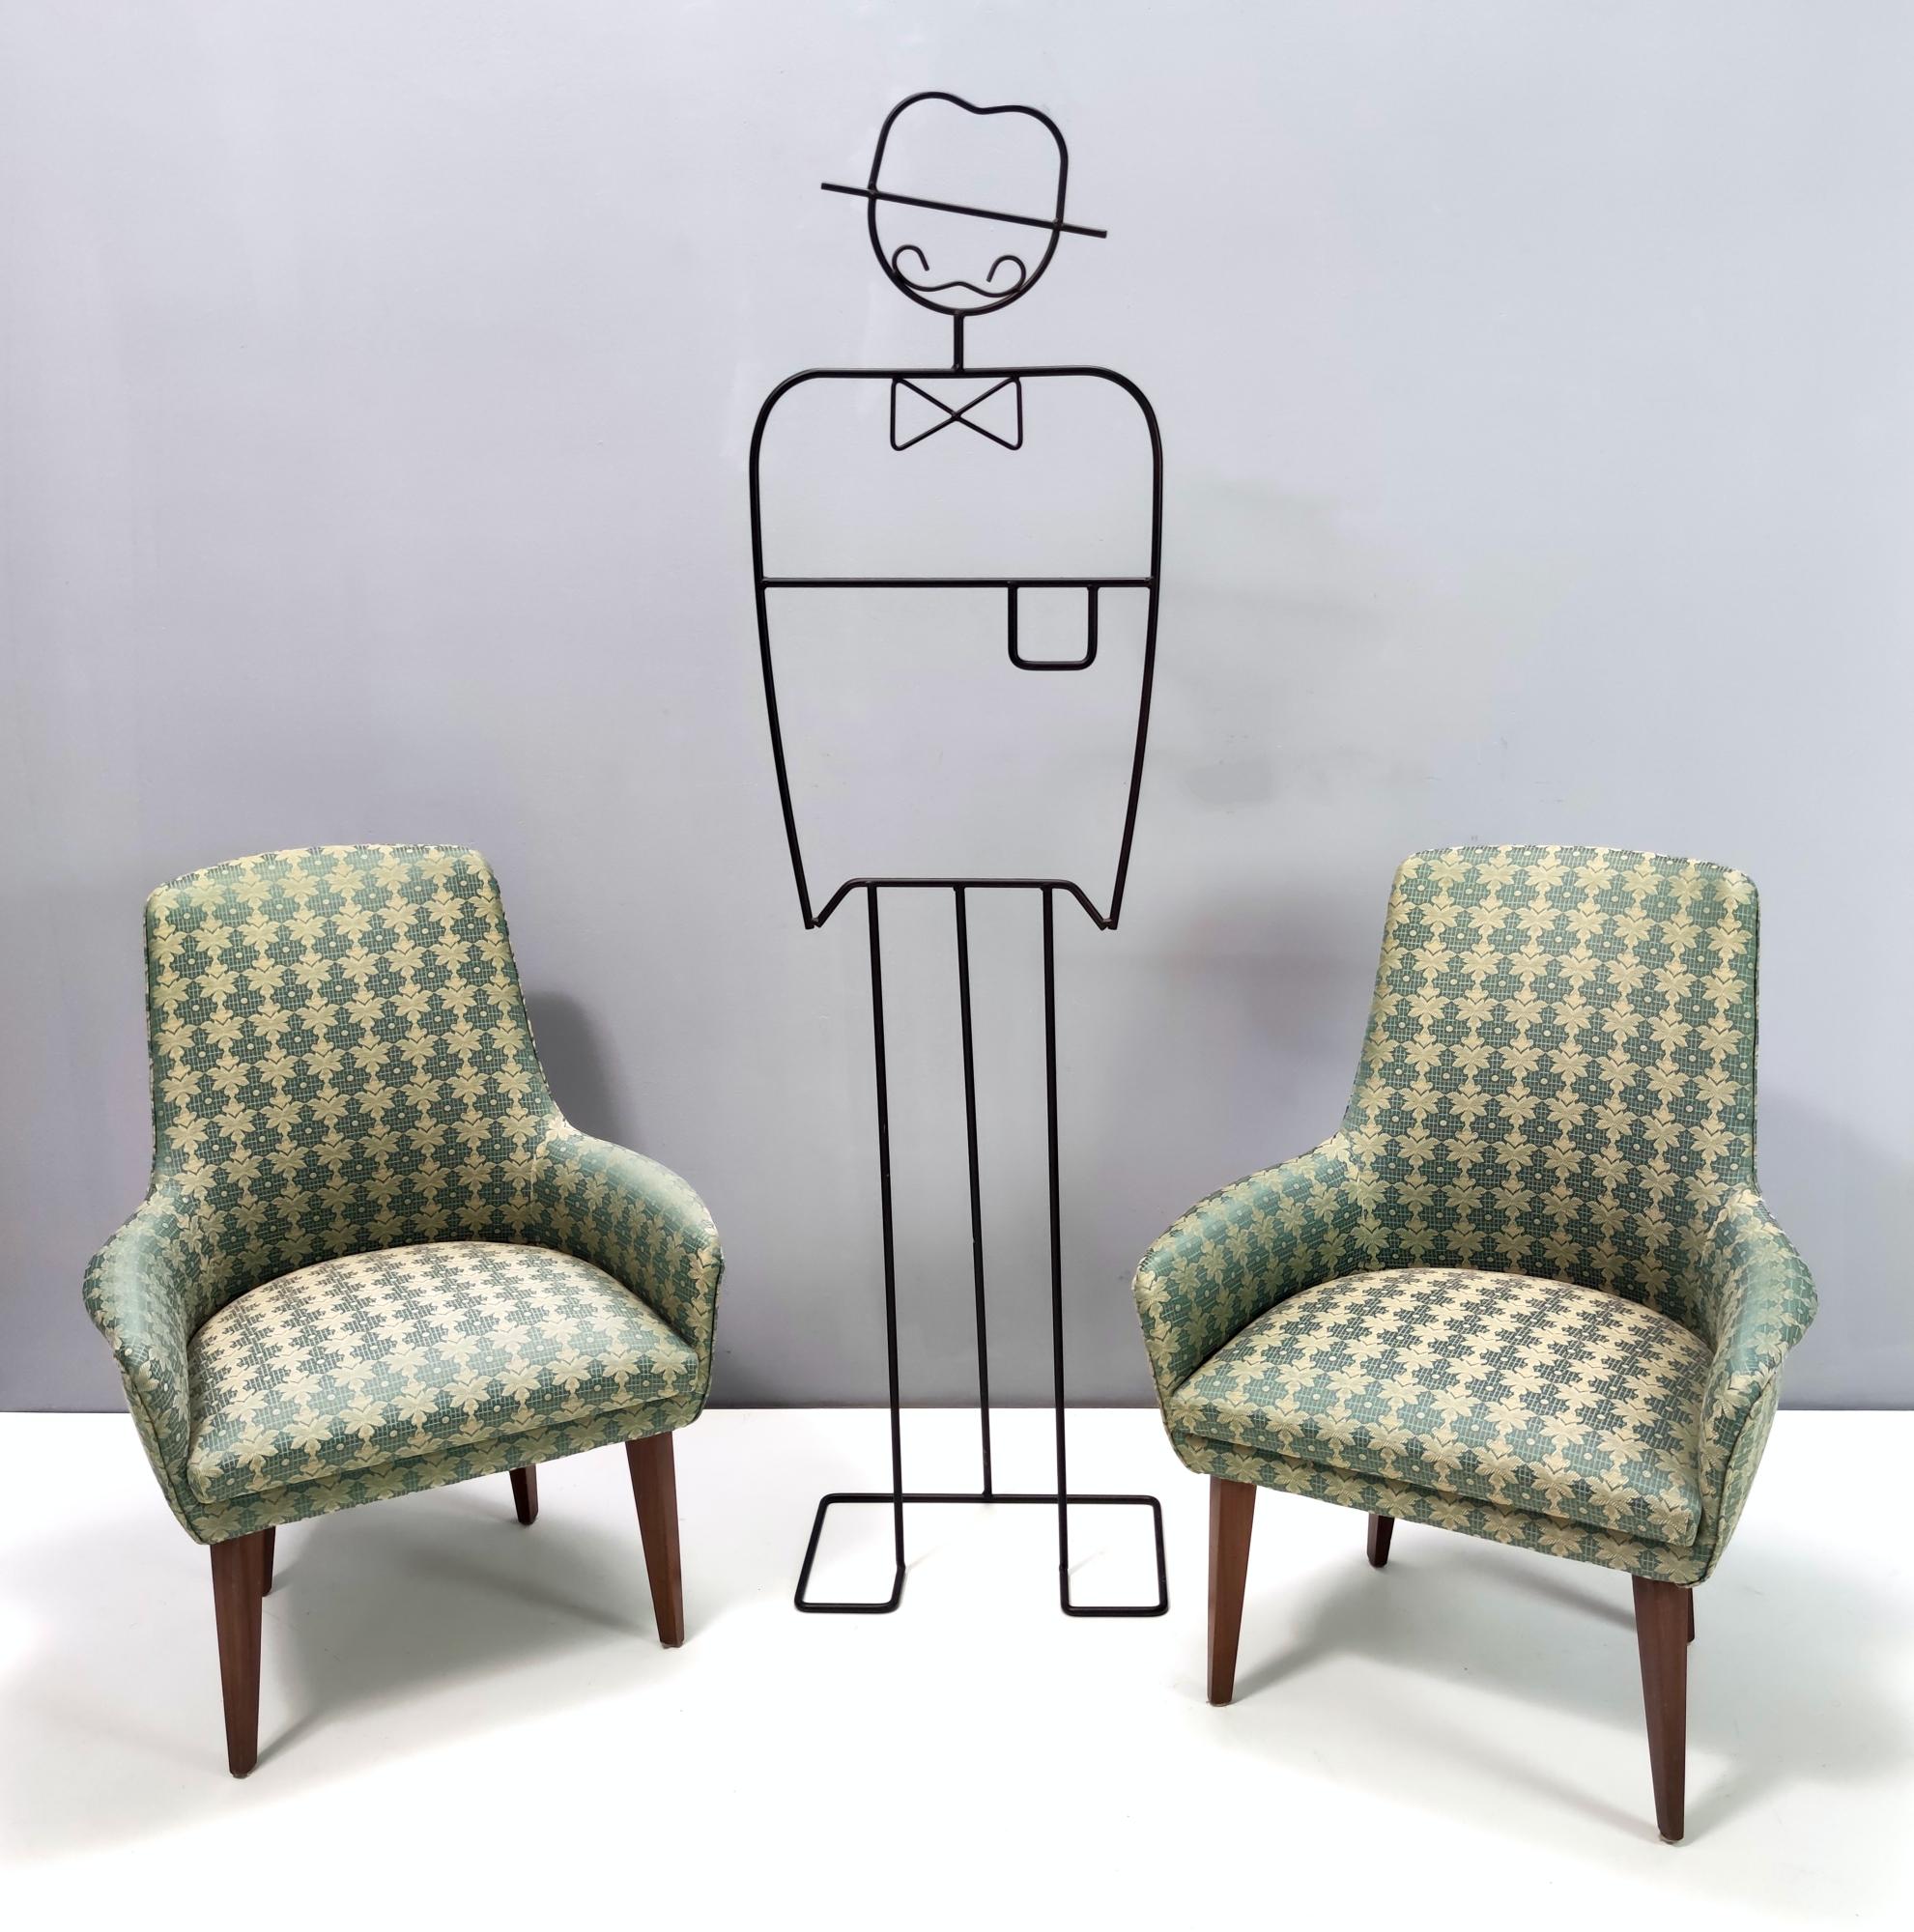 Made in Italy, 1960s.
These armchairs feature a beech frame and a high-quality green fabric upholstery.
They might show slight traces of use since they're vintage, but they can be considered as in excellent original condition, with no flaws and